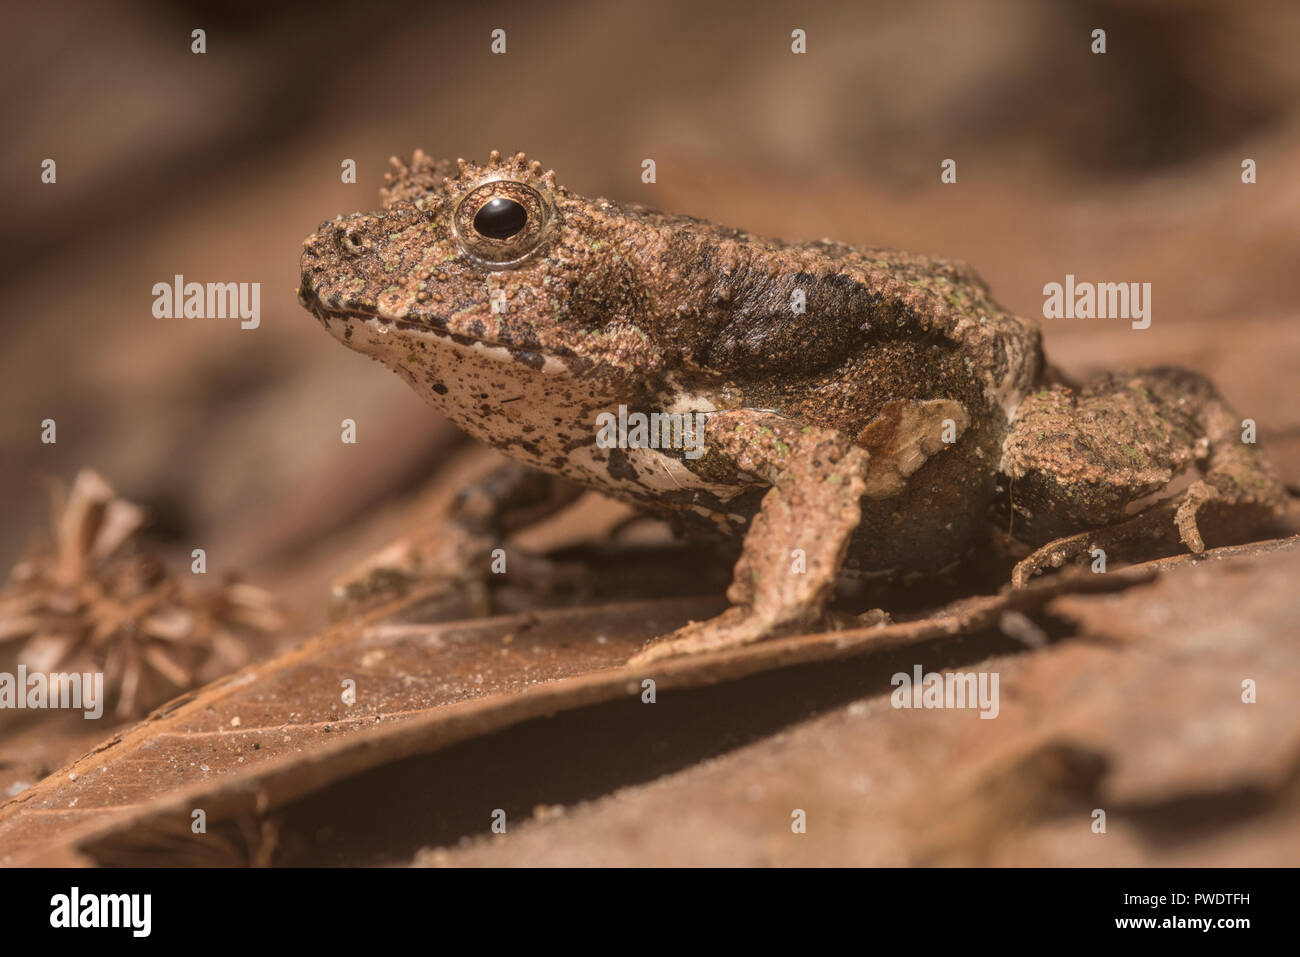 Perez's snouted frog (Edalorhina perezi) is a cryptic species from the jungles of the Amazonian basin. It is well camouflaged on the forest floor. Stock Photo